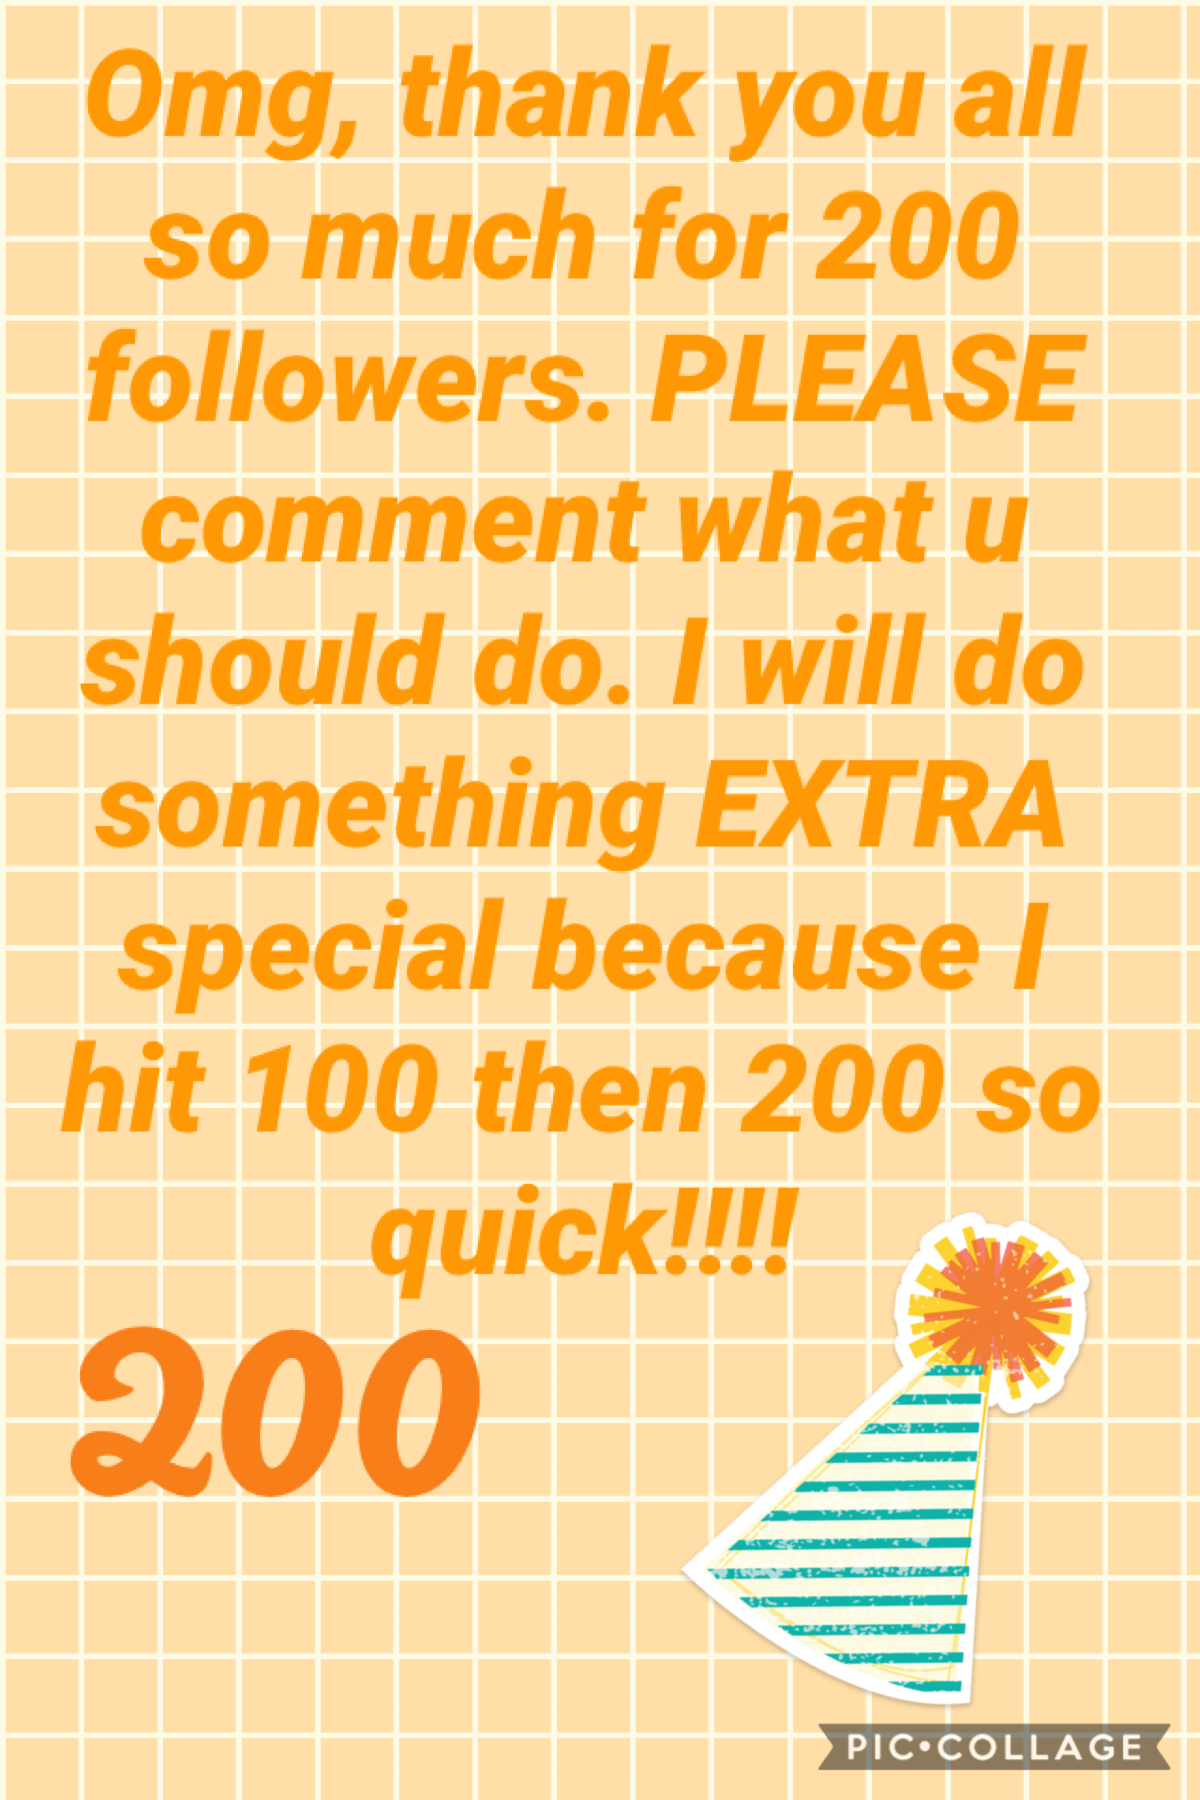 Thank you for 200 followers!!!!!